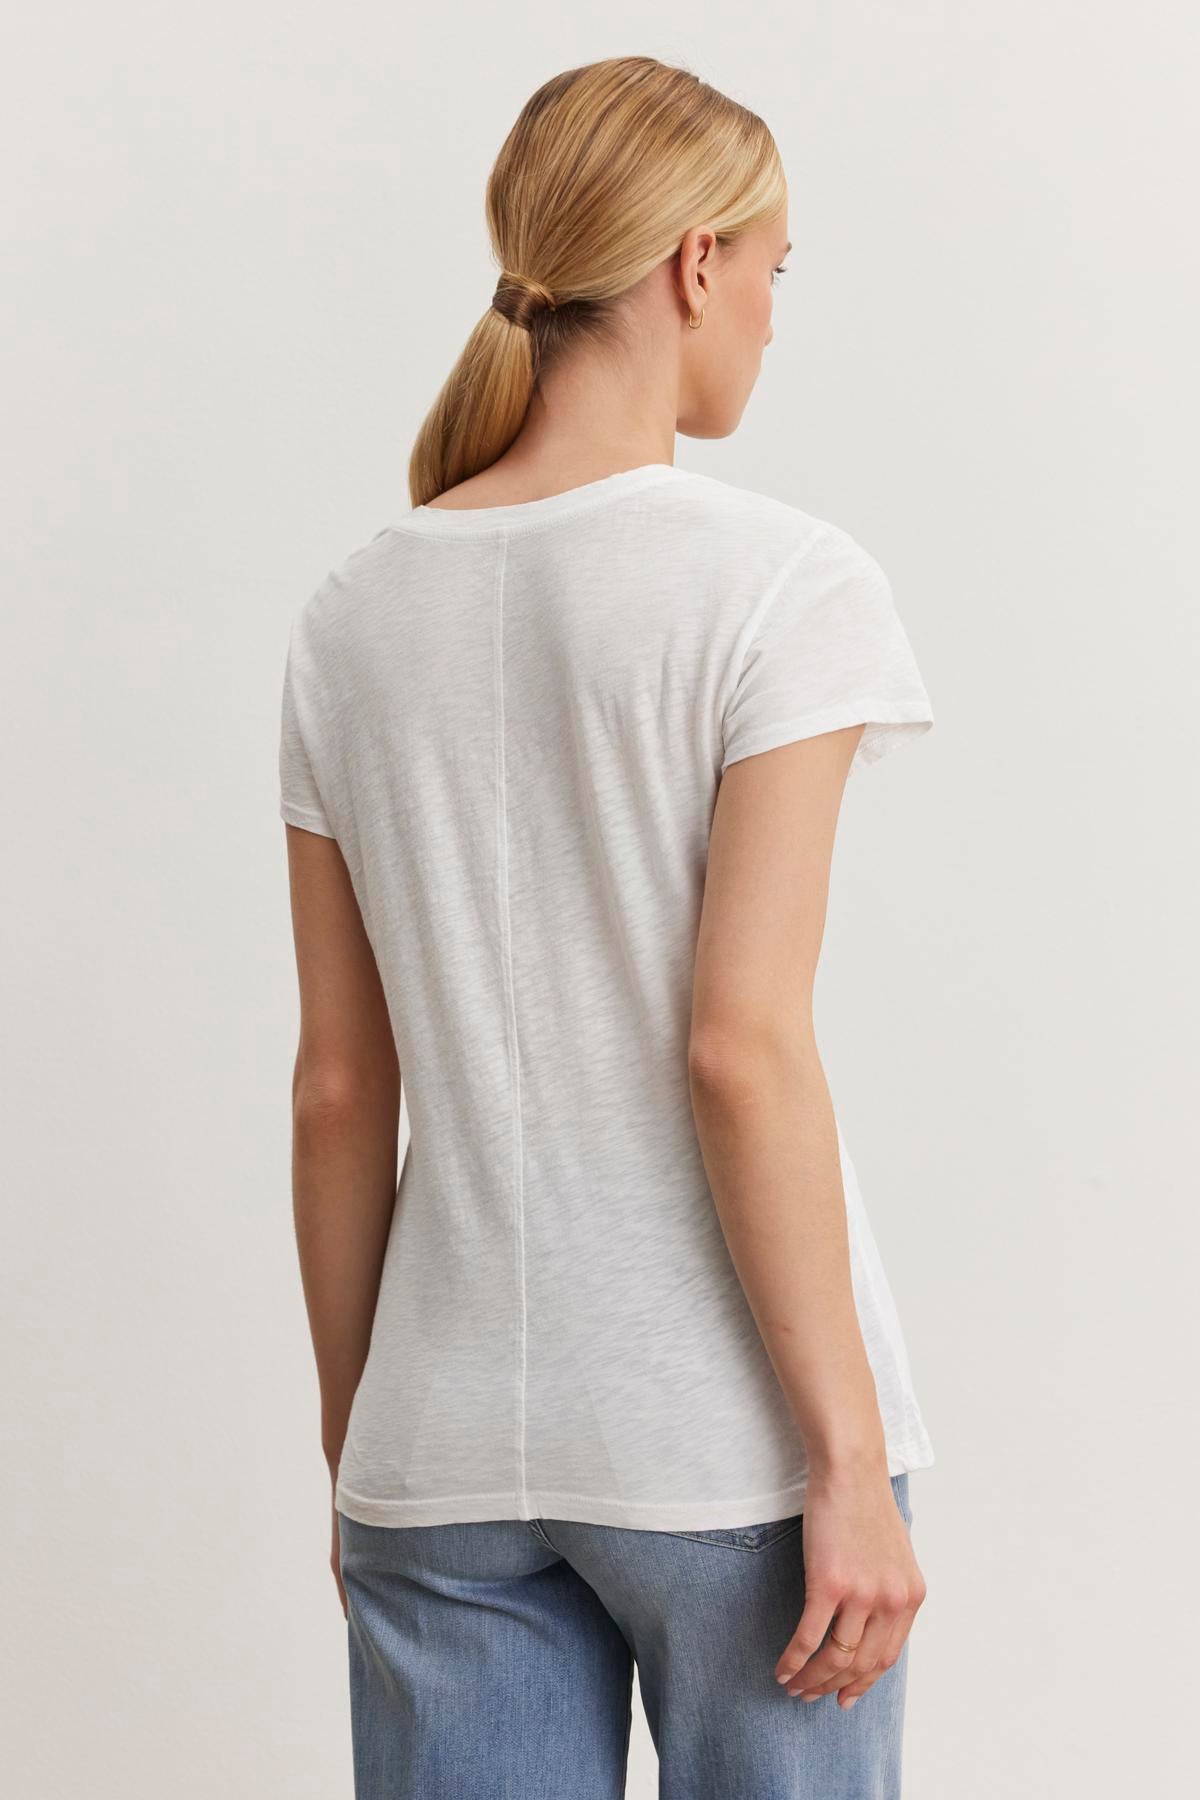 A person with blonde hair in a ponytail is facing away, wearing the Velvet by Graham & Spencer ODELIA TEE made from premium cotton slub fabric and blue jeans.-37366926016705